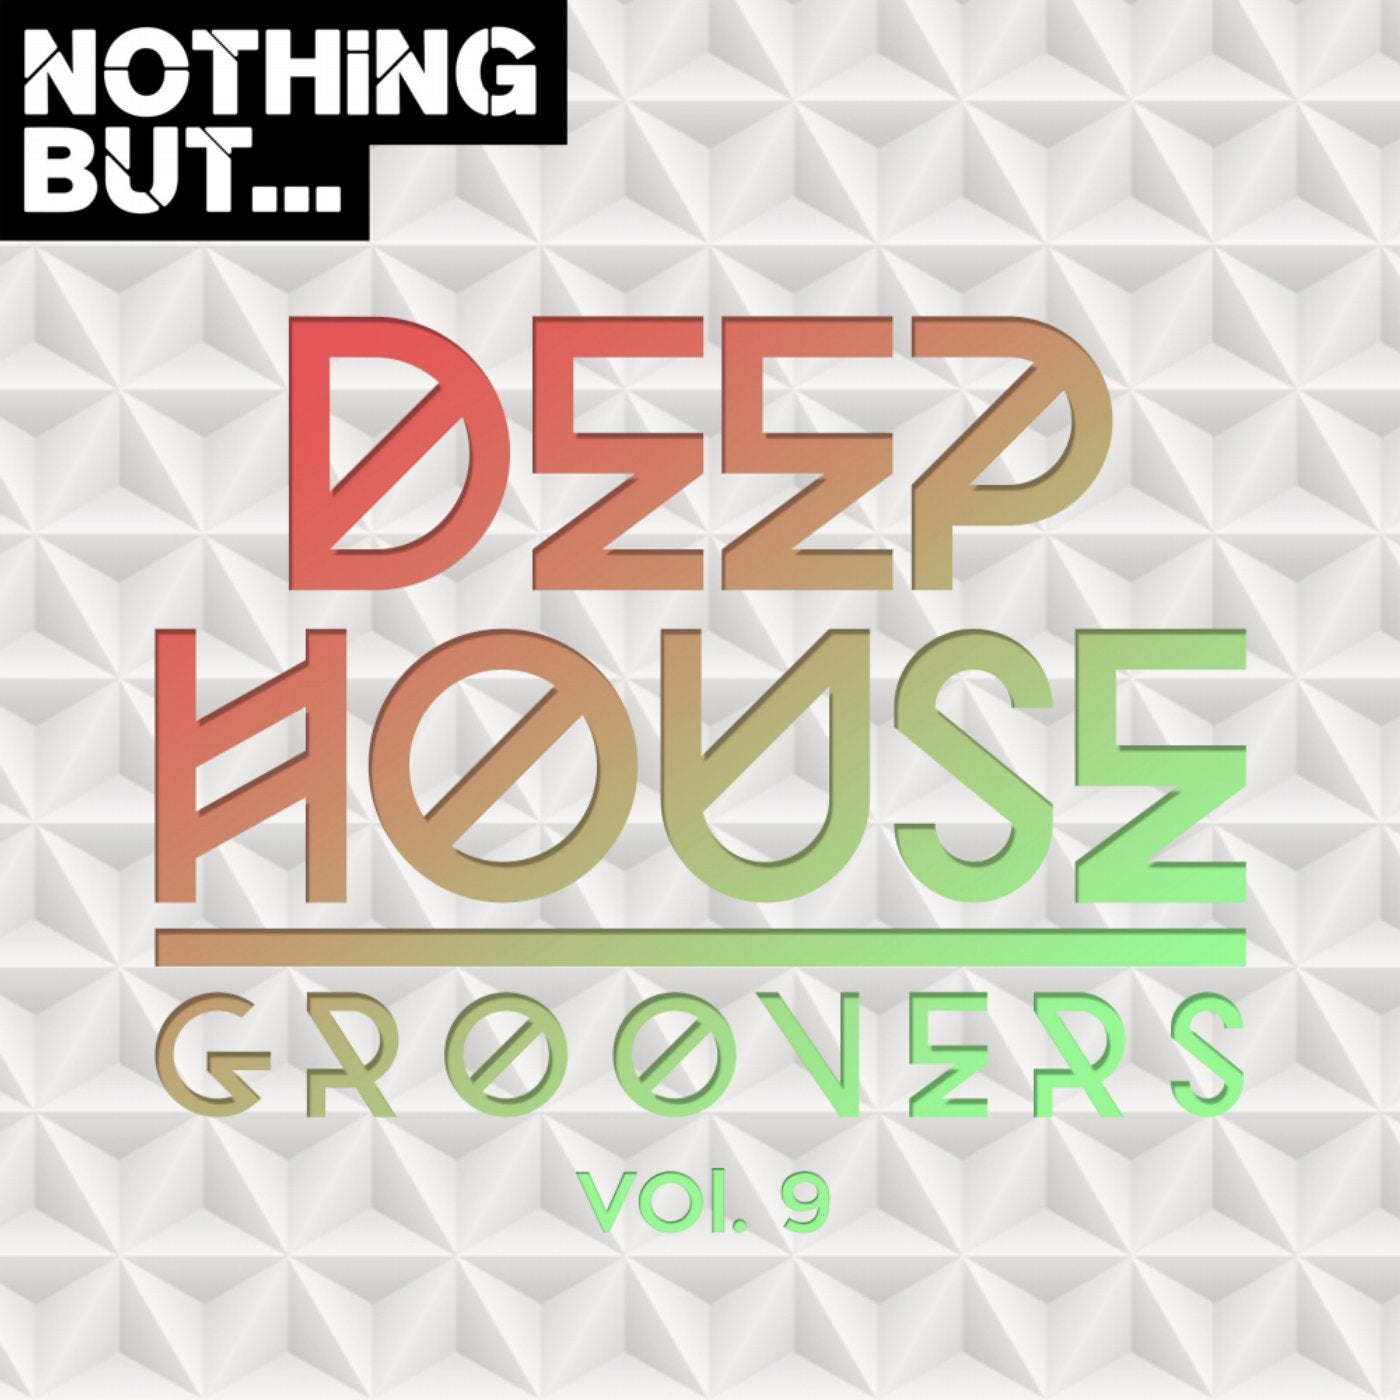 Nothing But... Deep House Groovers, Vol. 09